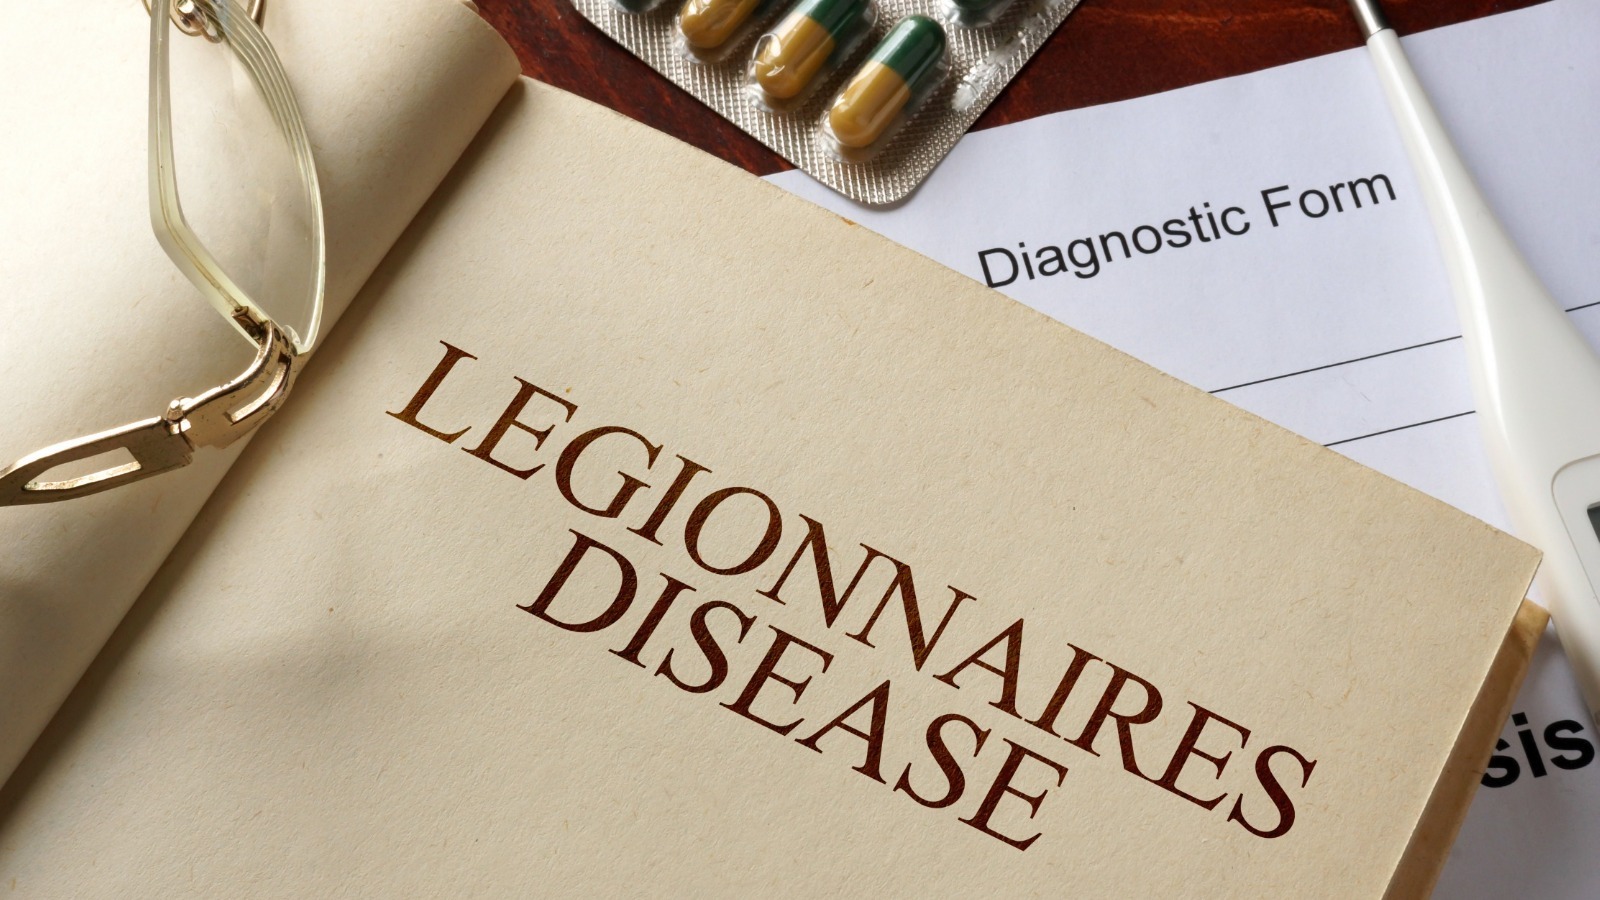 The Latest On The Legionnaires' Disease Outbreak In New York City